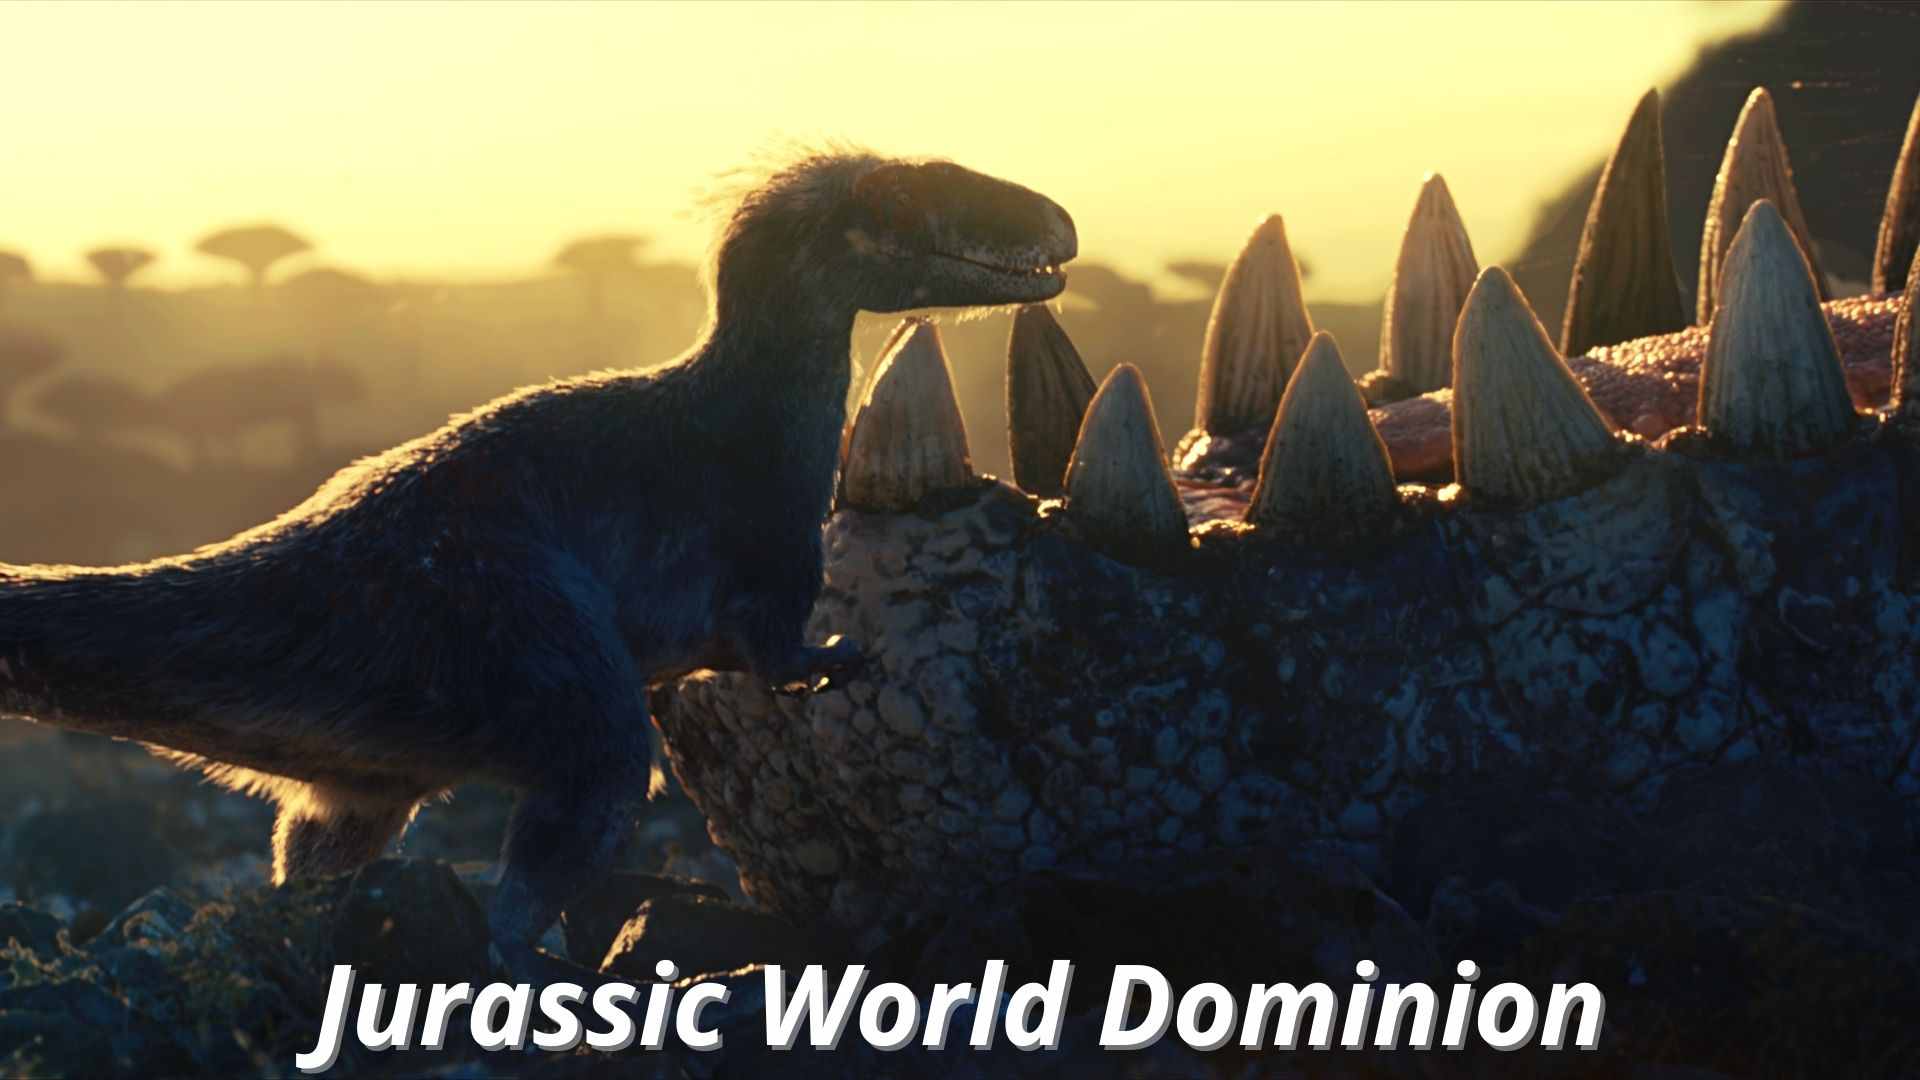 Jurassic World Dominion Release Date, Producer, Director, and Star Cast